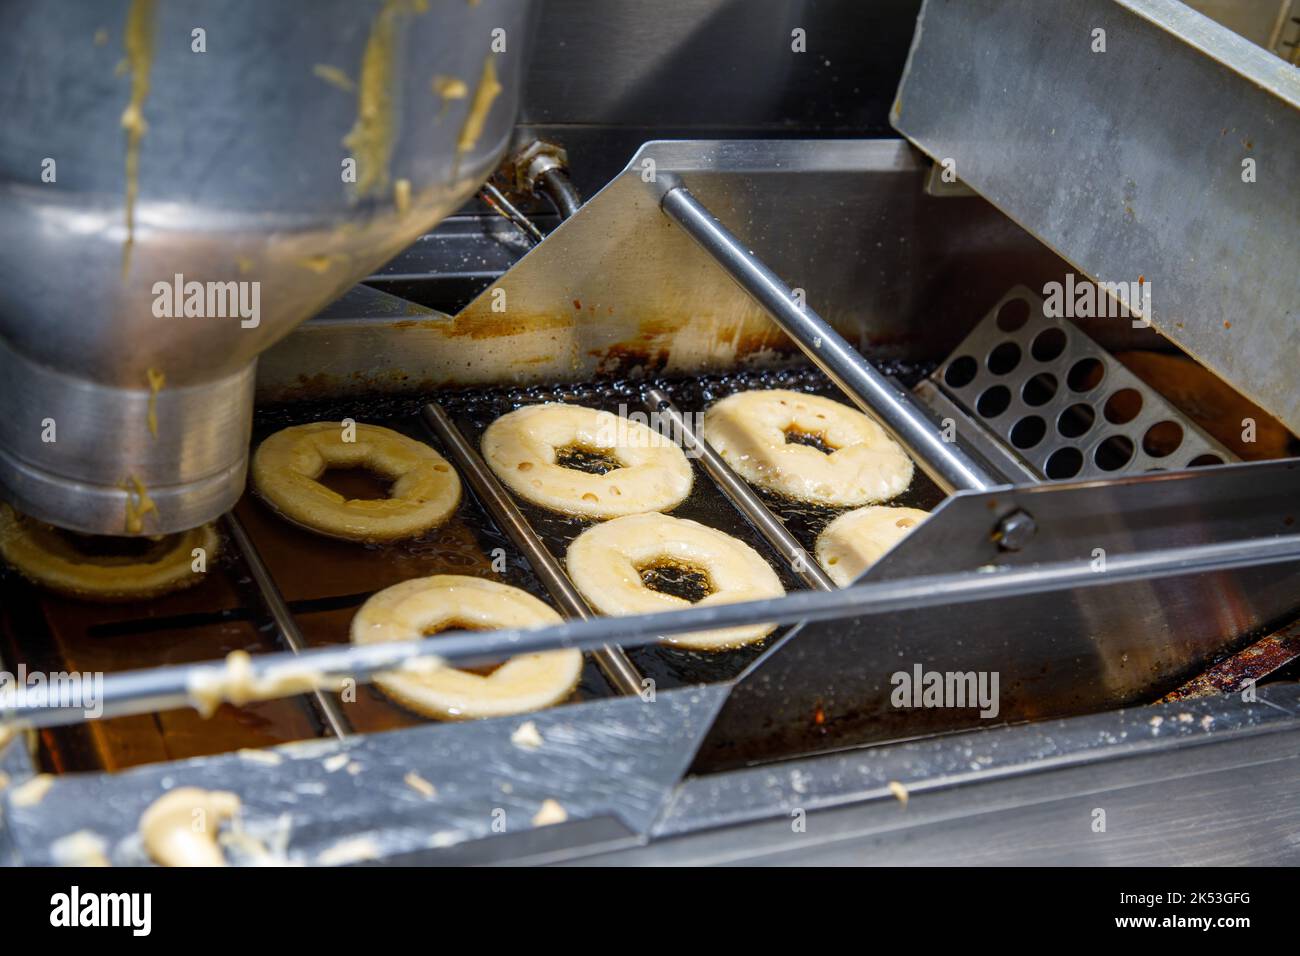 Rogers Family Orchard, Johnstown, Fulton County, New York: Making apple cider donuts is an autumn tradition in upstate New York. Stock Photo